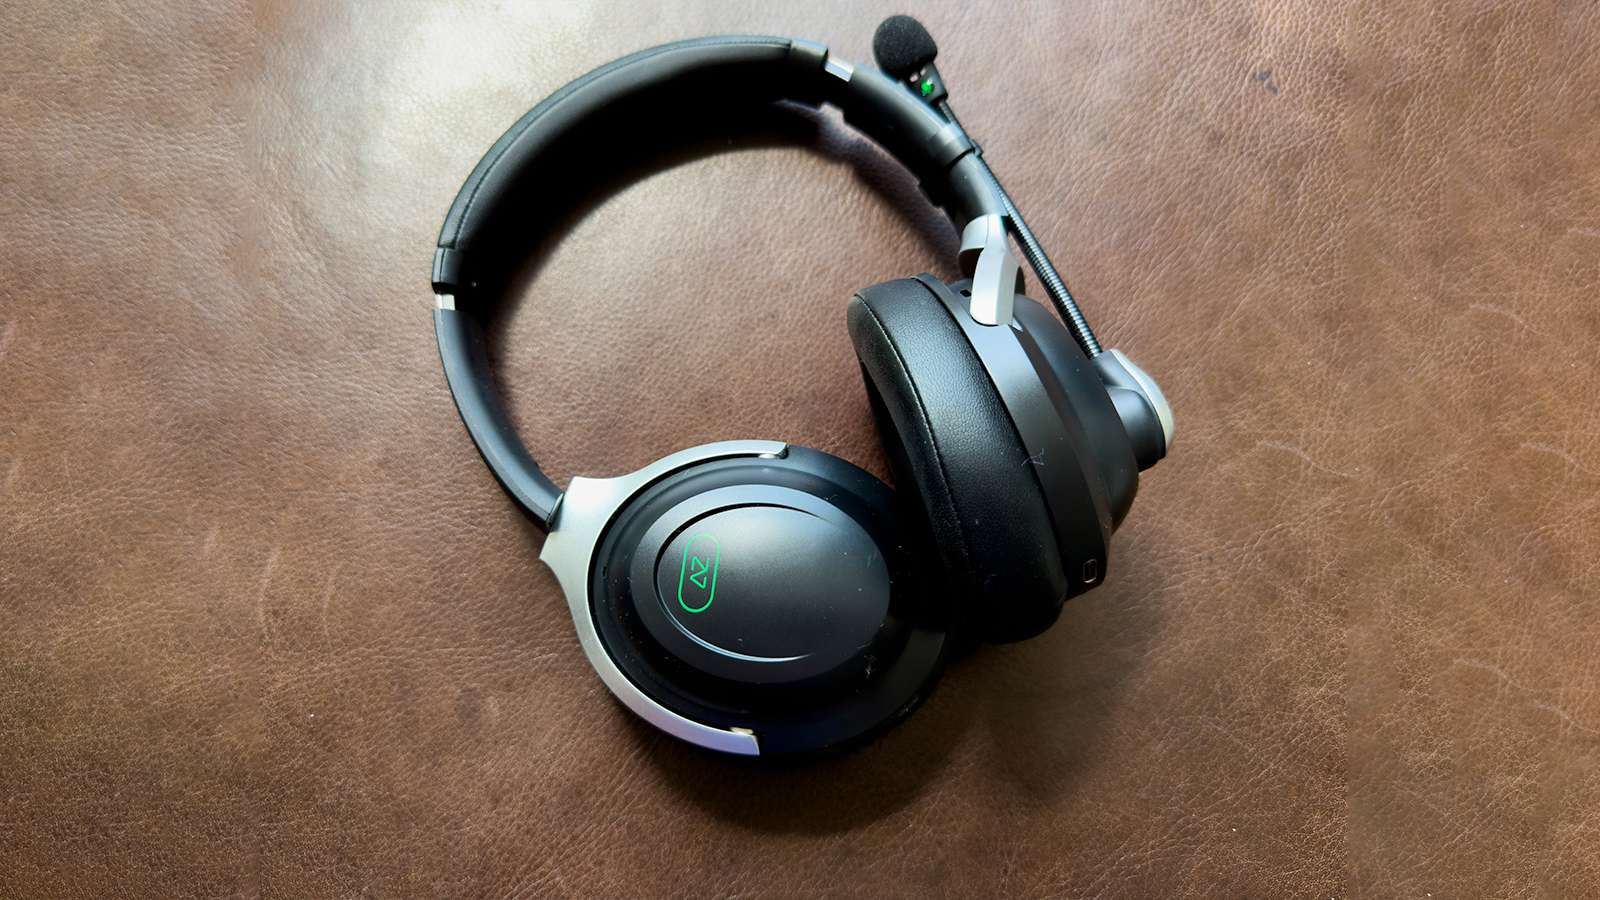 A-Spire - Hybrid ANC Gaming Headset Review